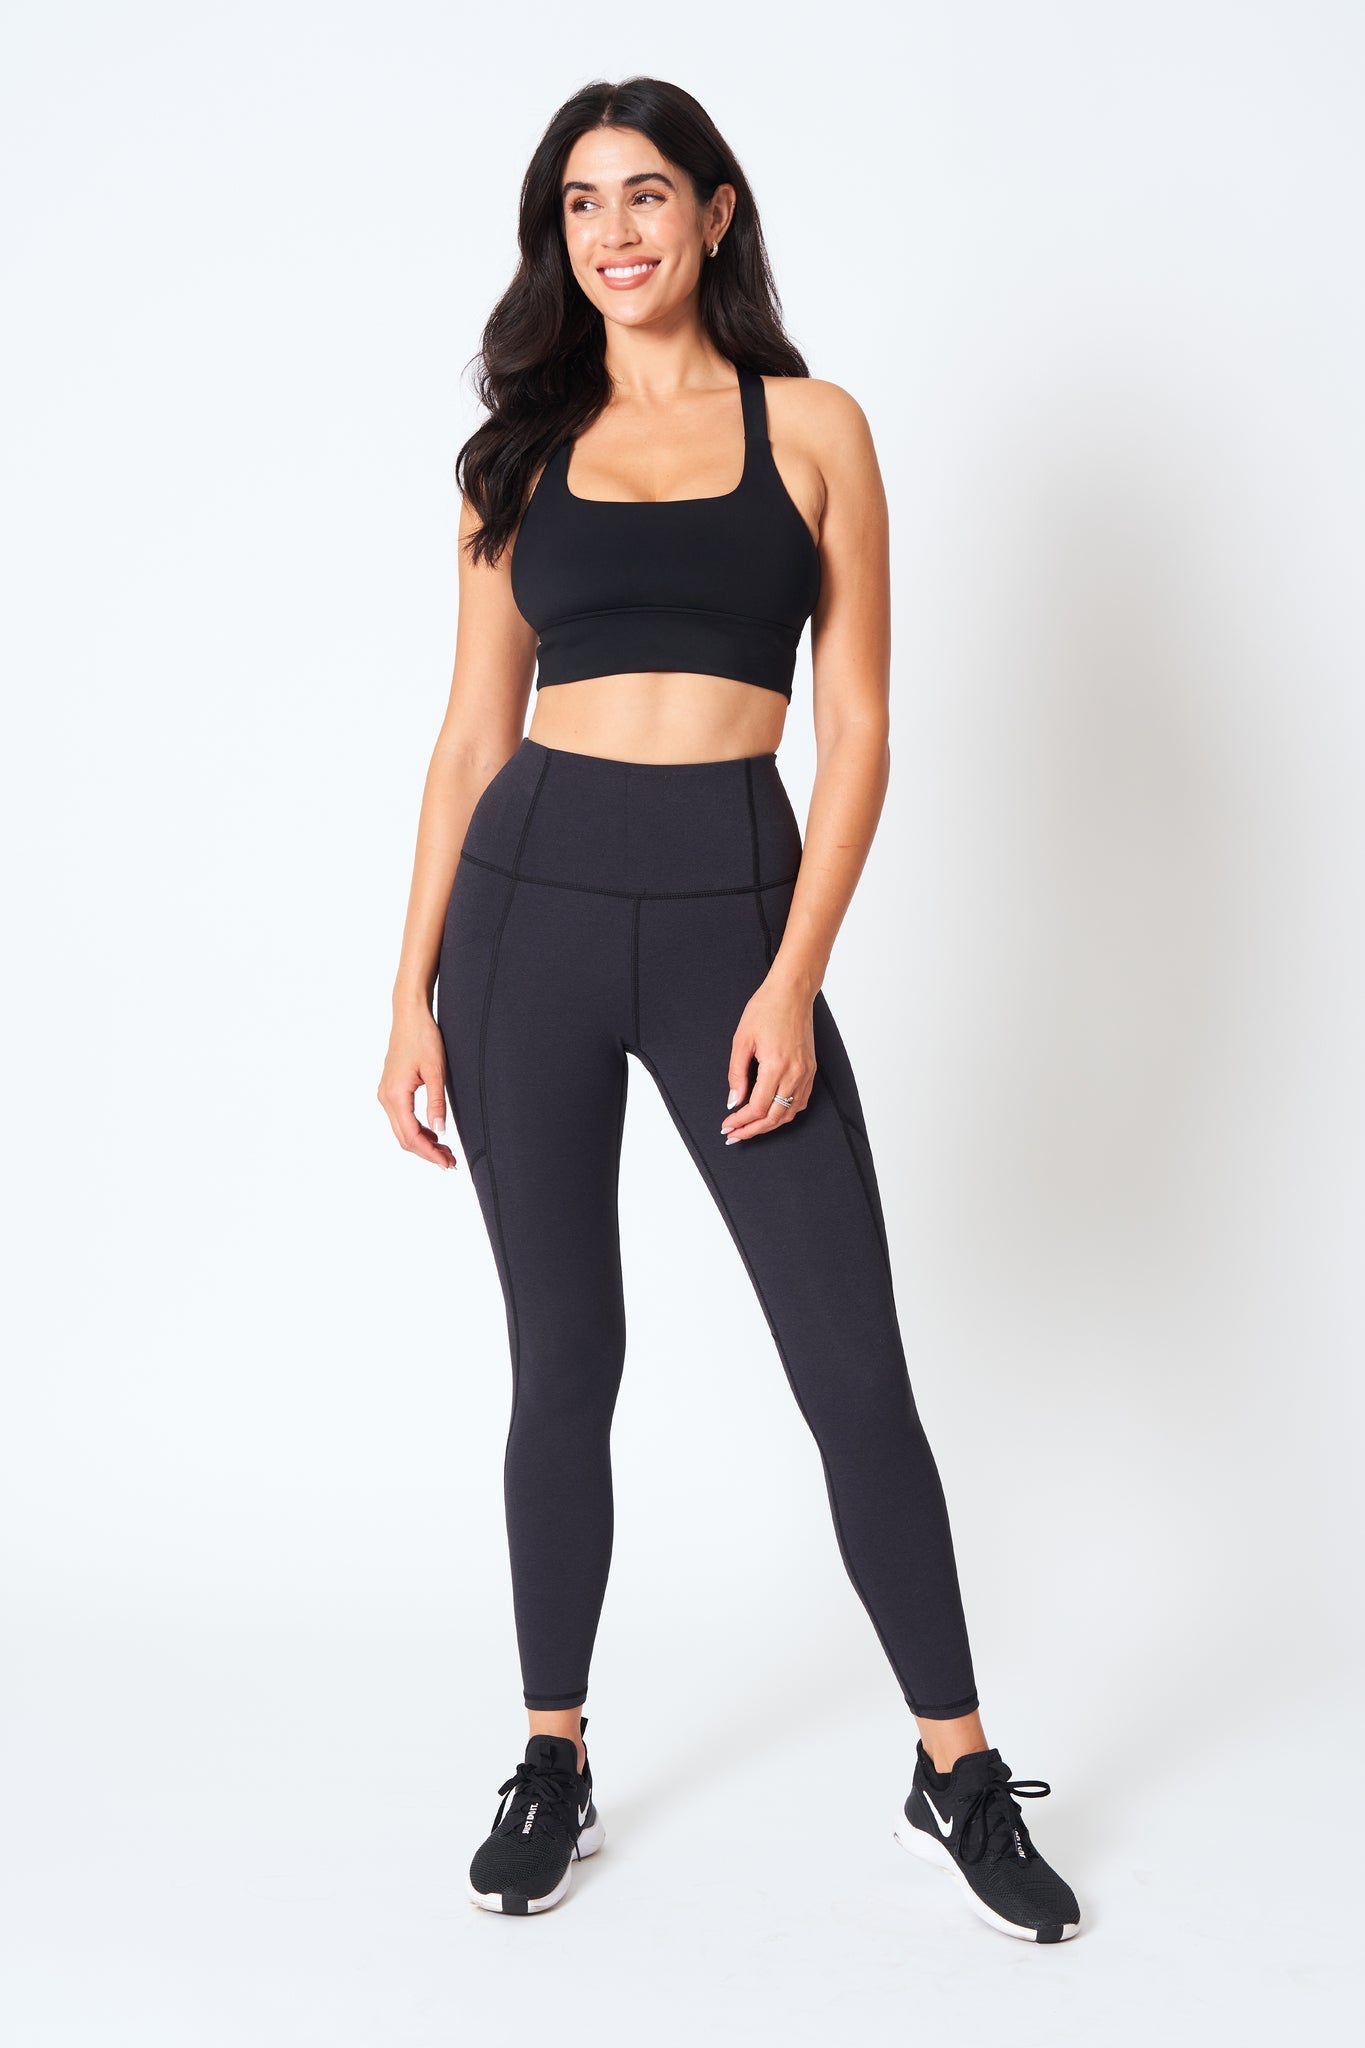 The Athlete Legging by Urban Luxe Lifestyles